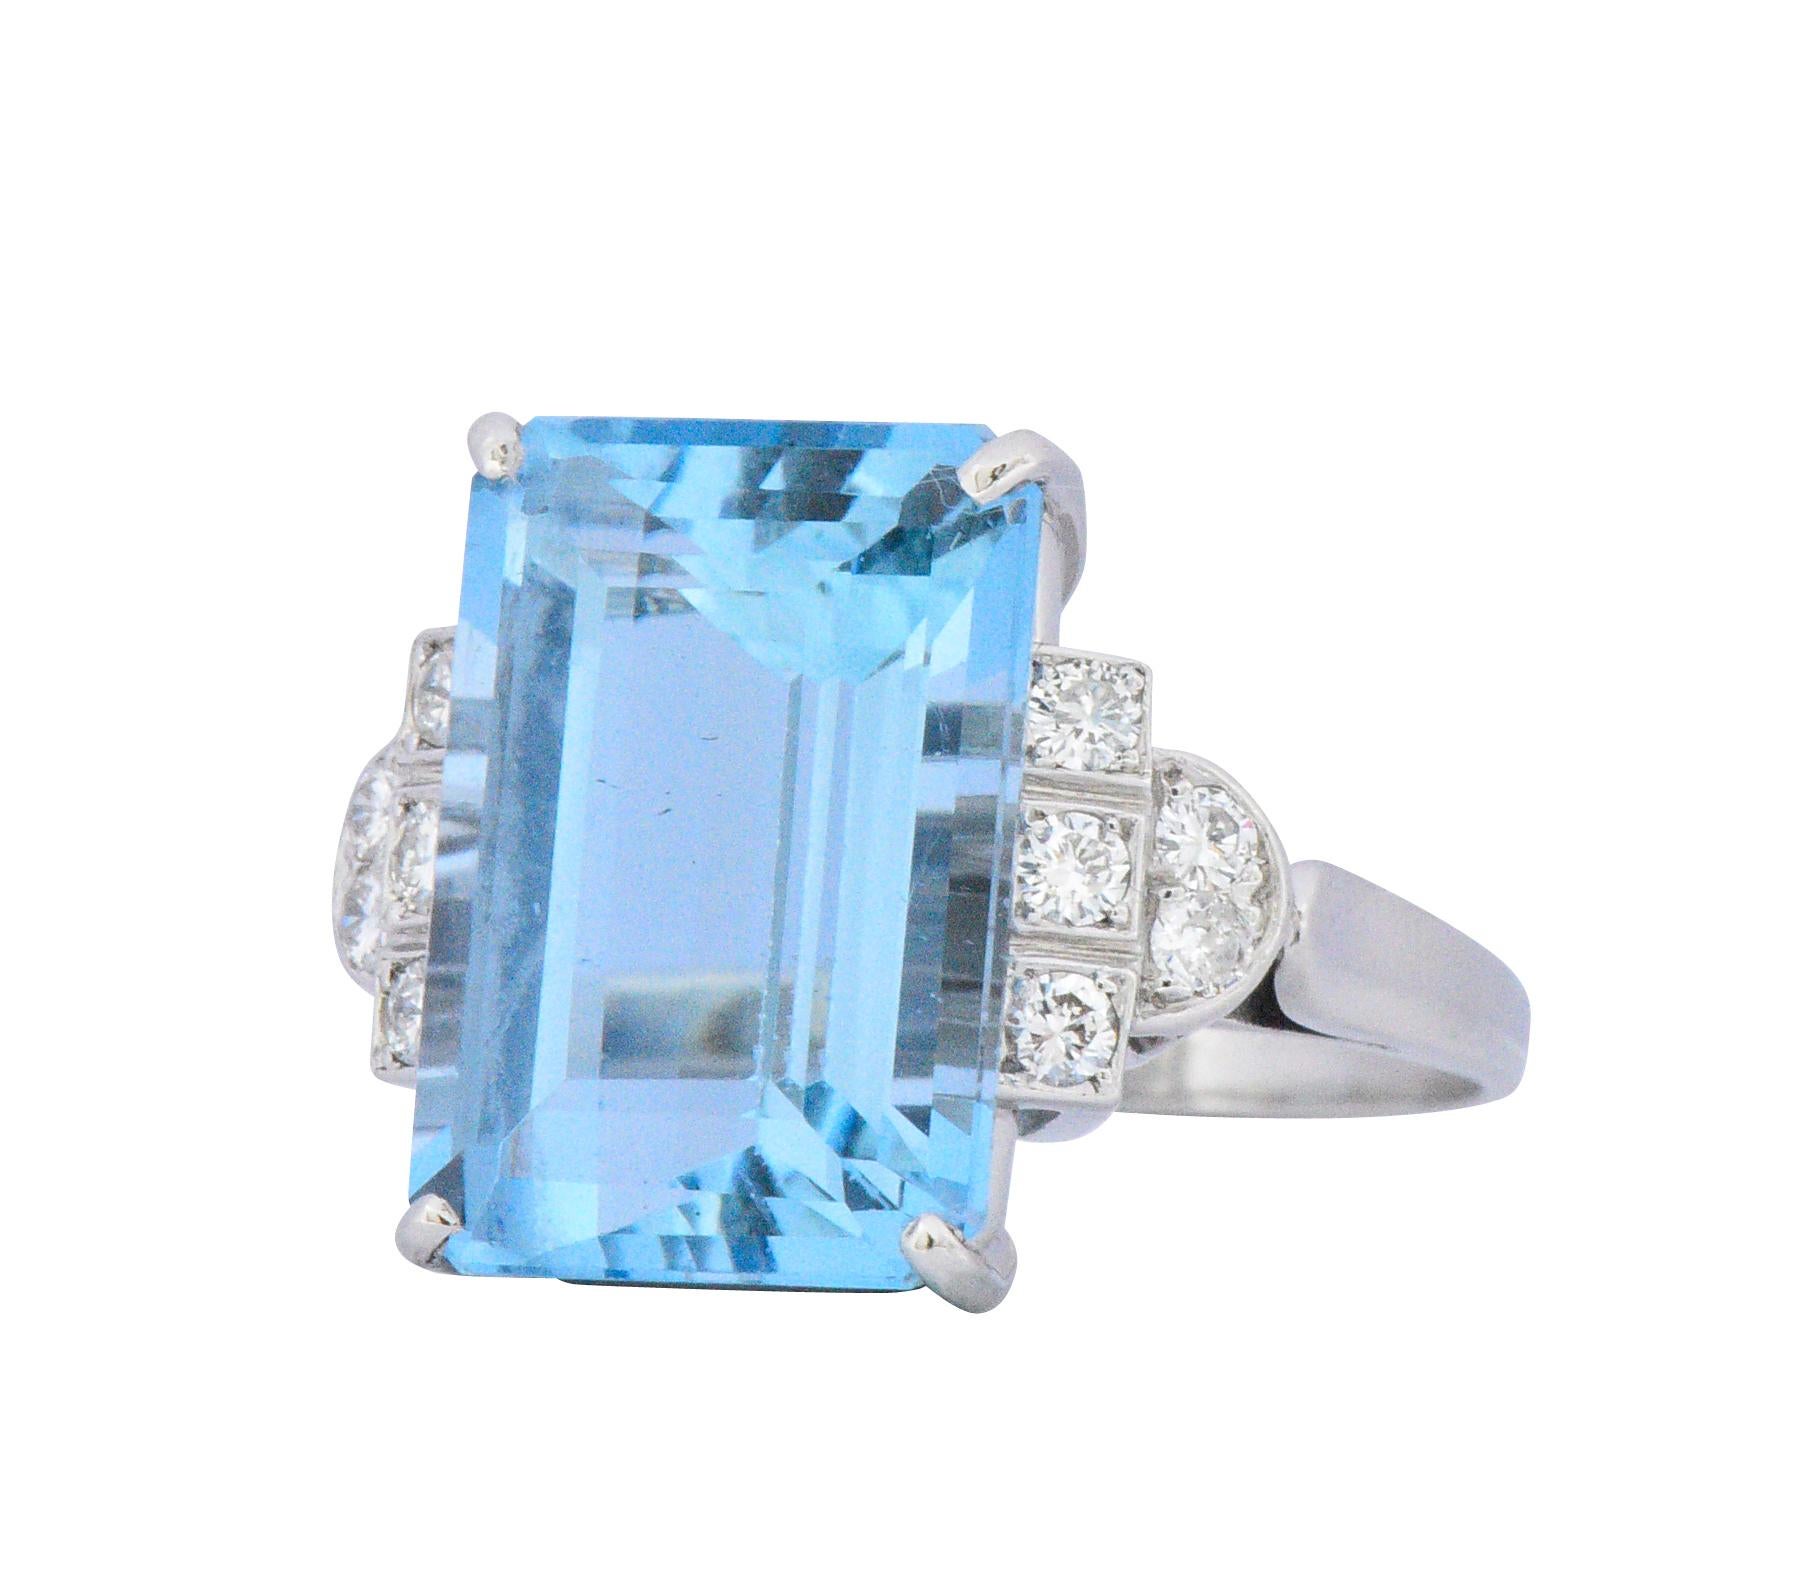 Centering a rectangular step cut aquamarine weighing approximately 7.55 carats, bright medium light blue

Flanked by round brilliant cut diamonds weighing approximately 0.20 carats total, G/H color and VS to I clarity

Tested as platinum

Circa